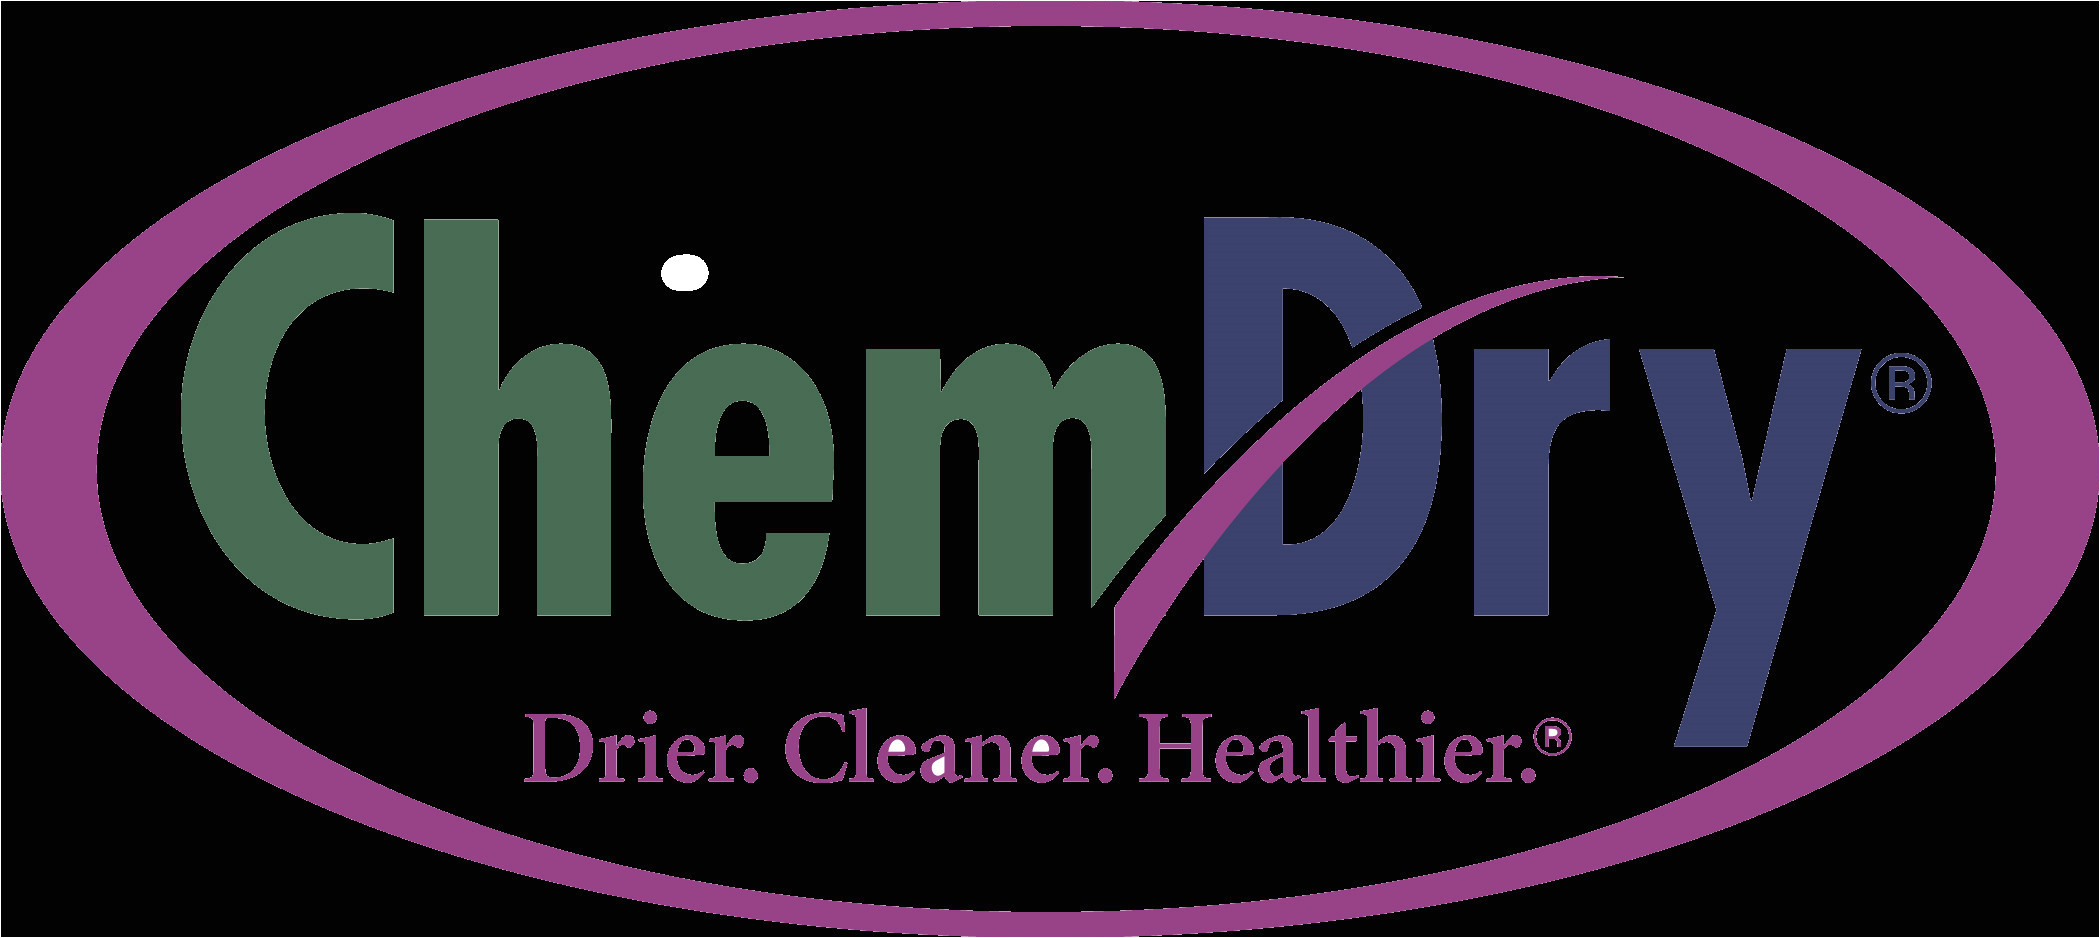 midlothian va carpet cleaning by chem dry rug upholstery cleaners